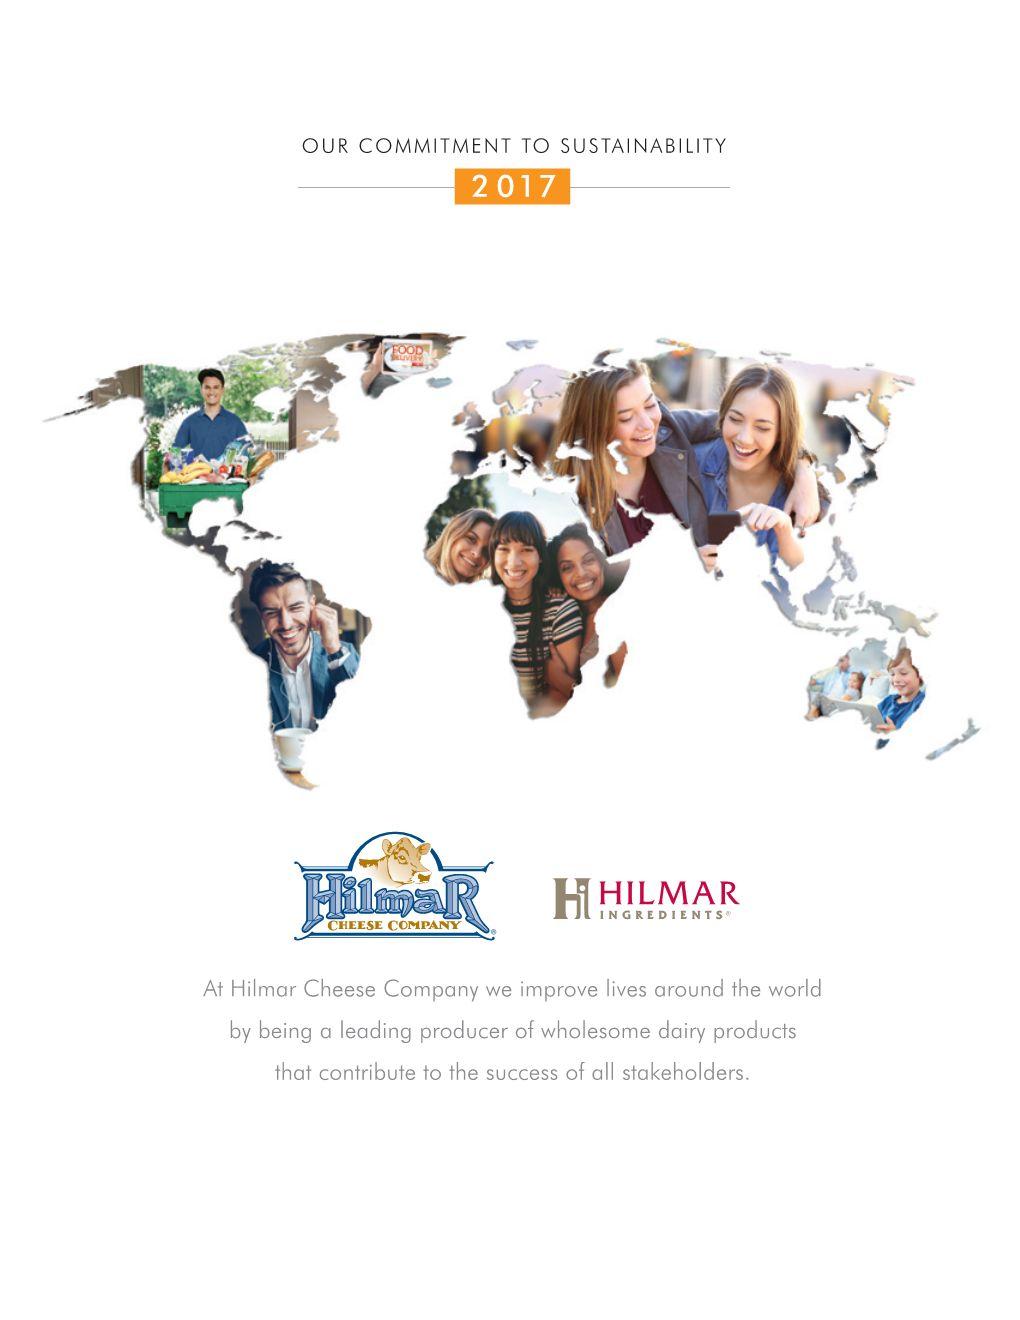 At Hilmar Cheese Company We Improve Lives Around the World by Being a Leading Producer of Wholesome Dairy Products That Contribute to the Success of All Stakeholders